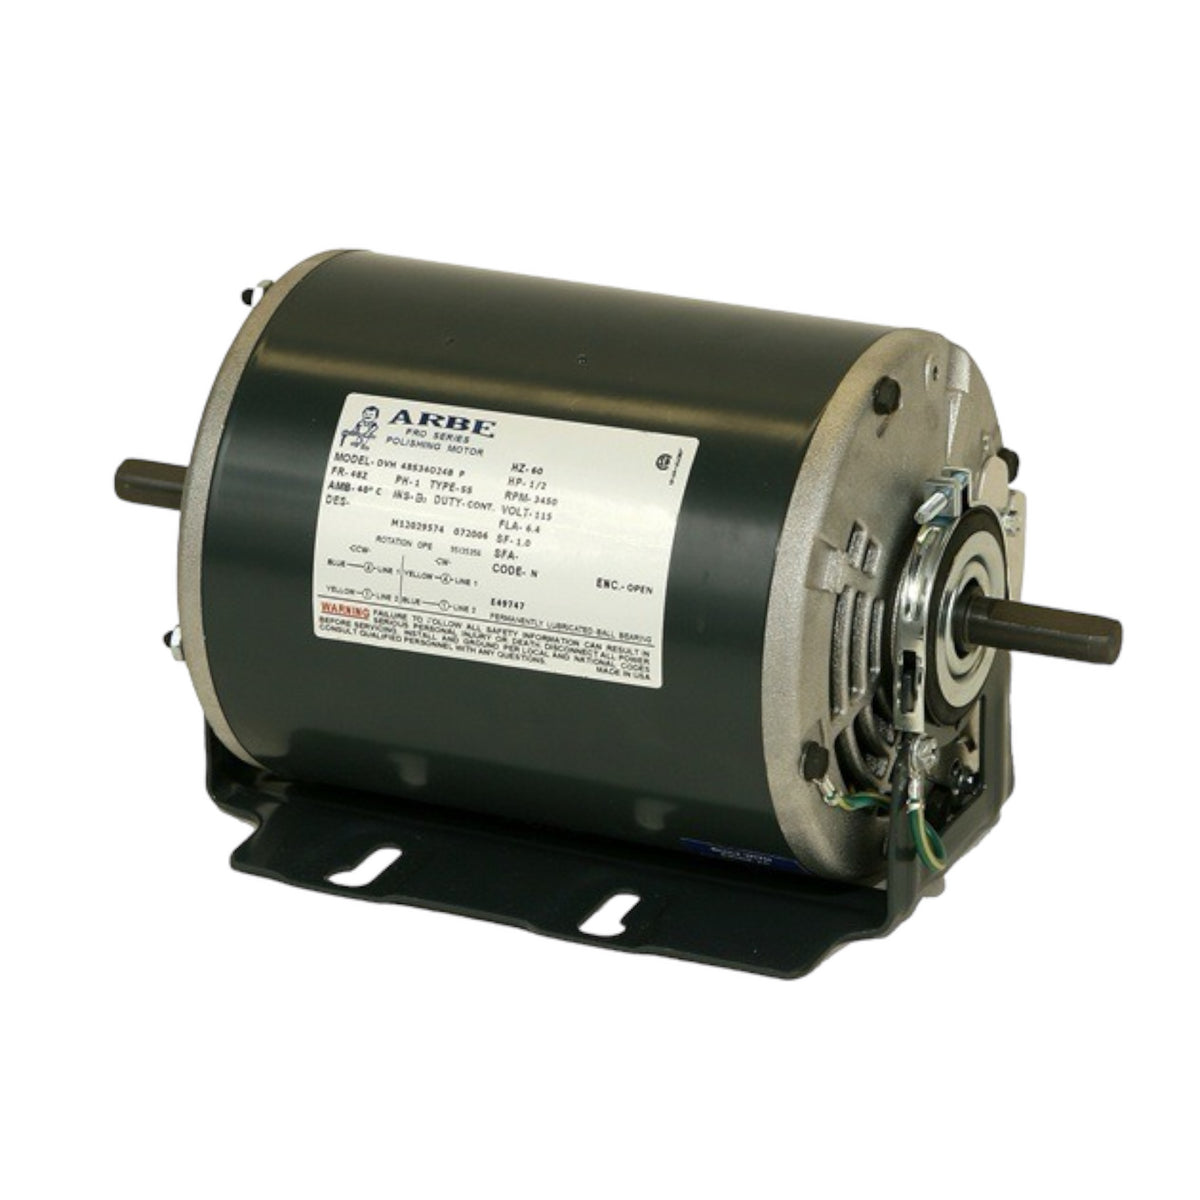 Motor Only w/ Spindles F/#DS-20